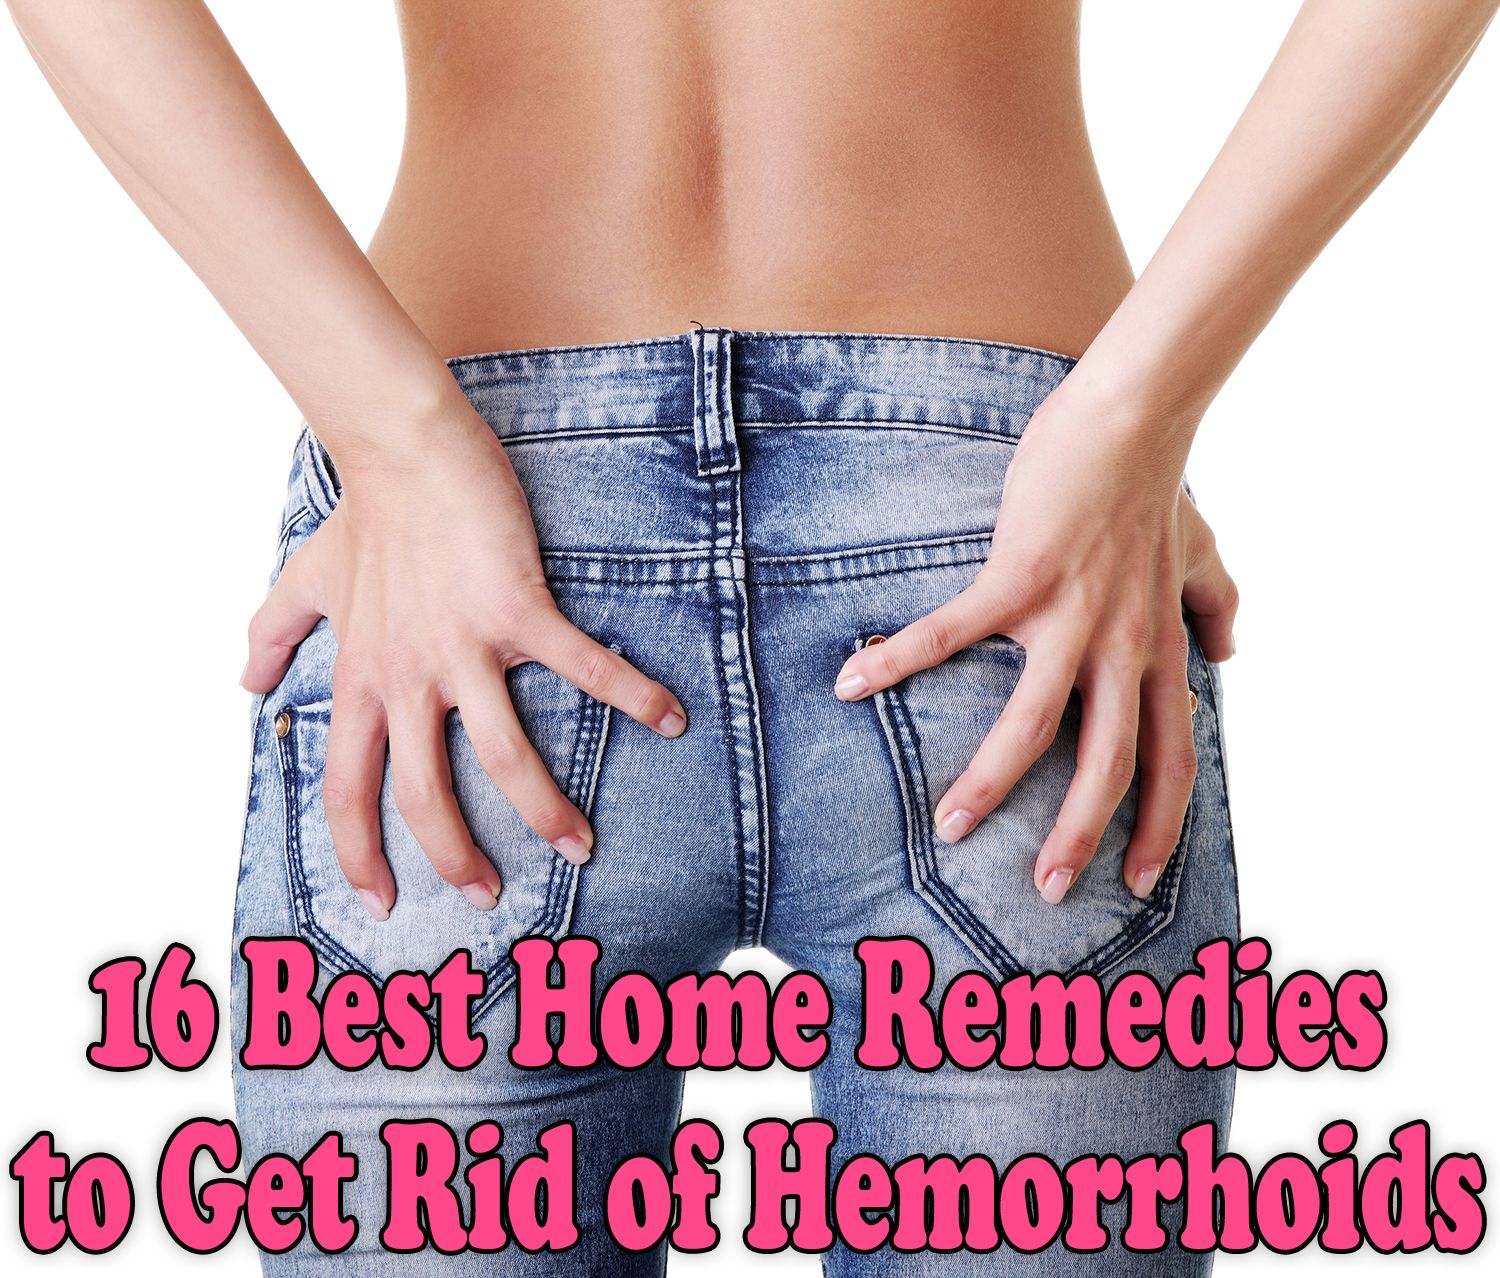 16 Best Home Remedies to Get Rid of Hemorrhoids